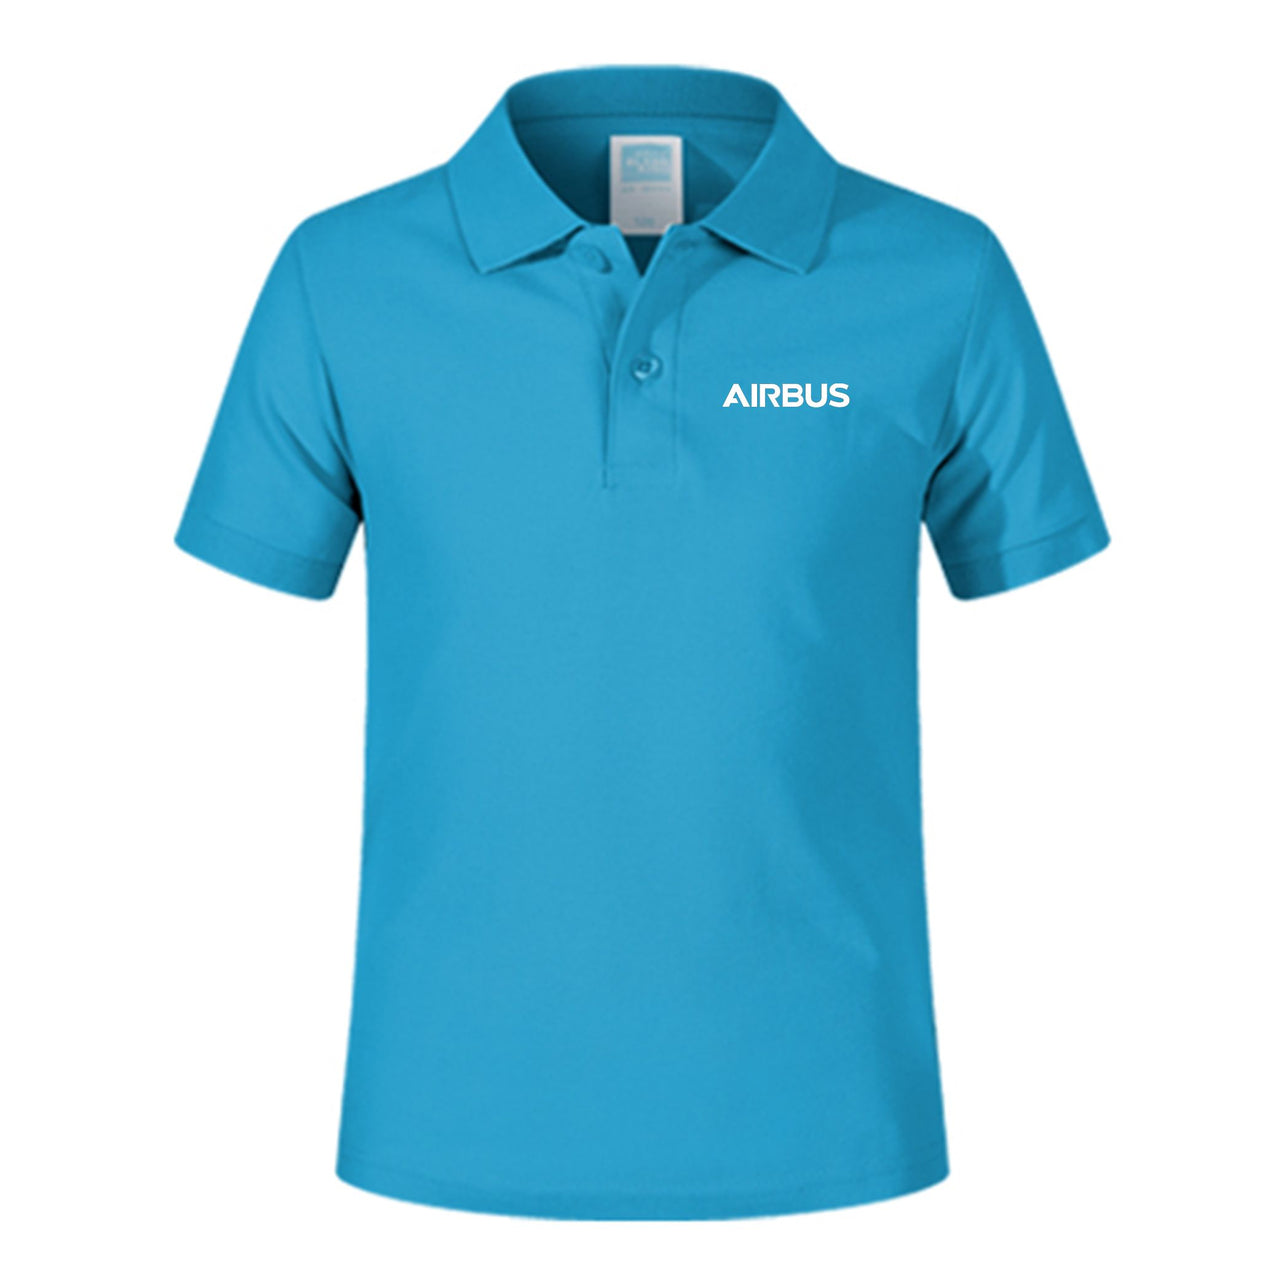 Airbus & Text Designed Children Polo T-Shirts